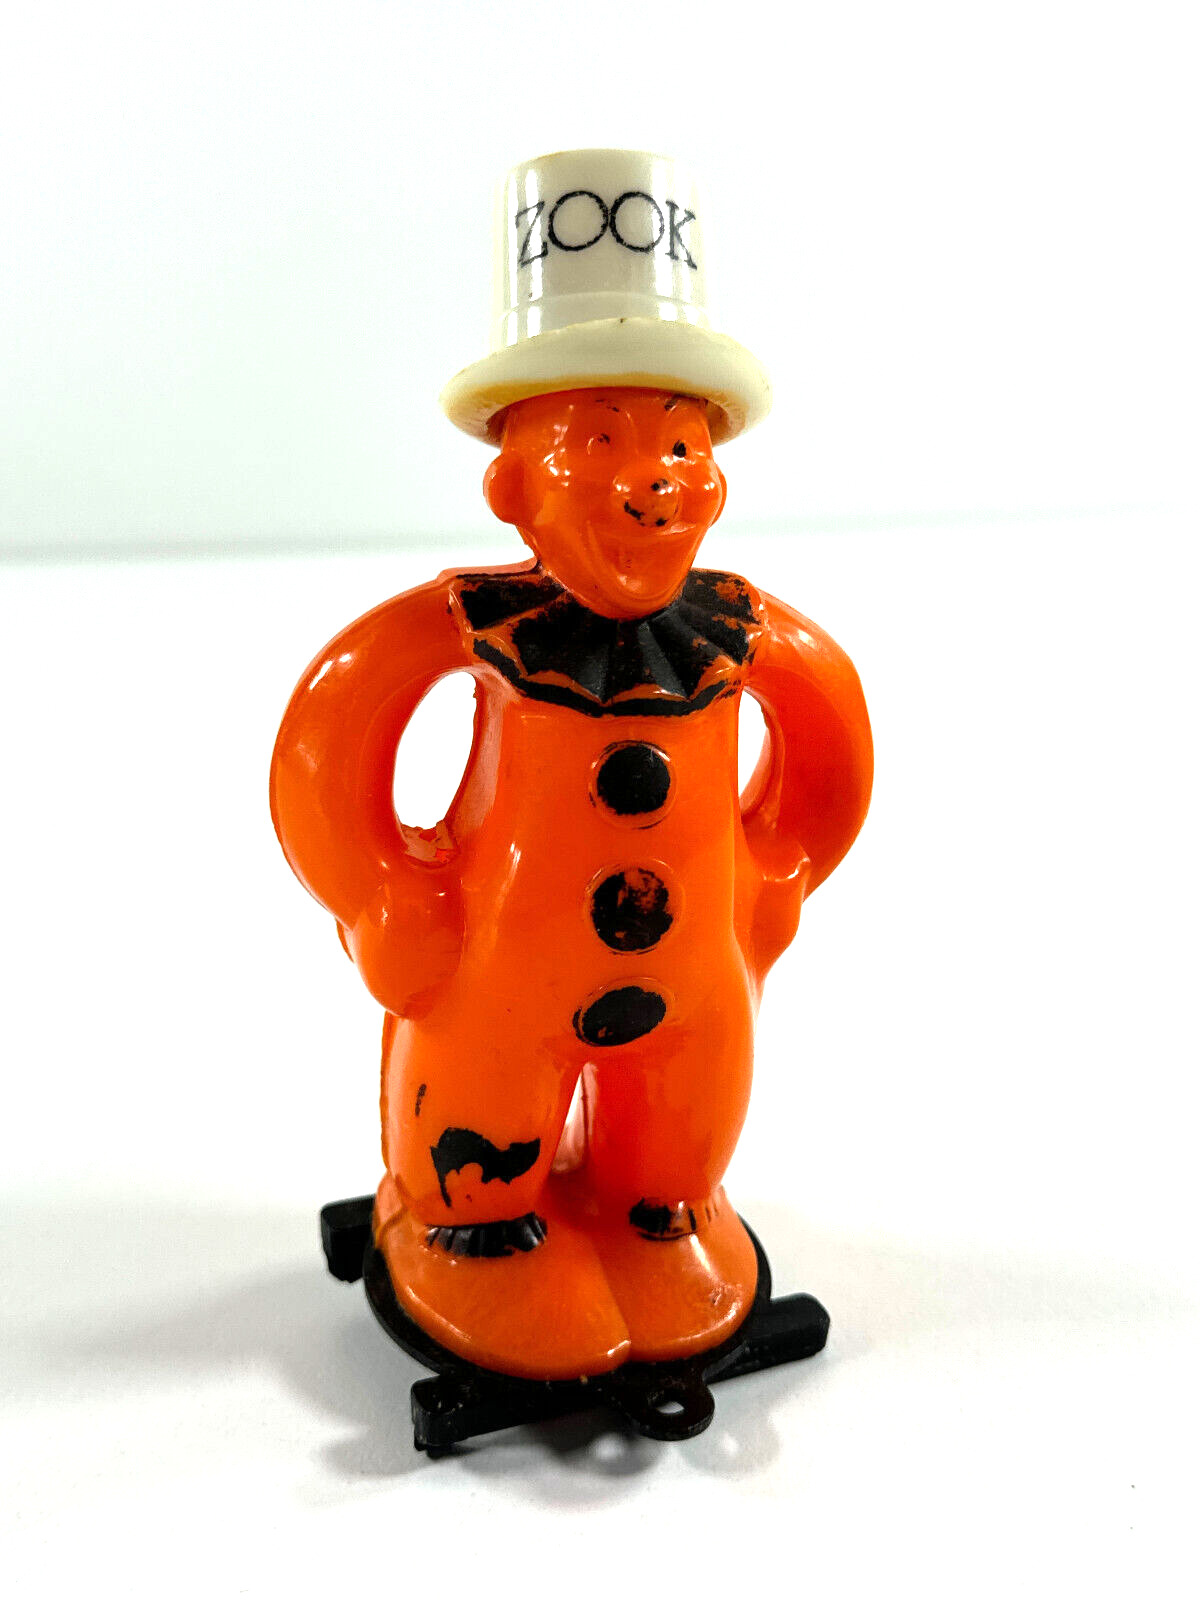 vtg Rosbro Halloween ZOOK the Clown Candy Container pull toy L@@K